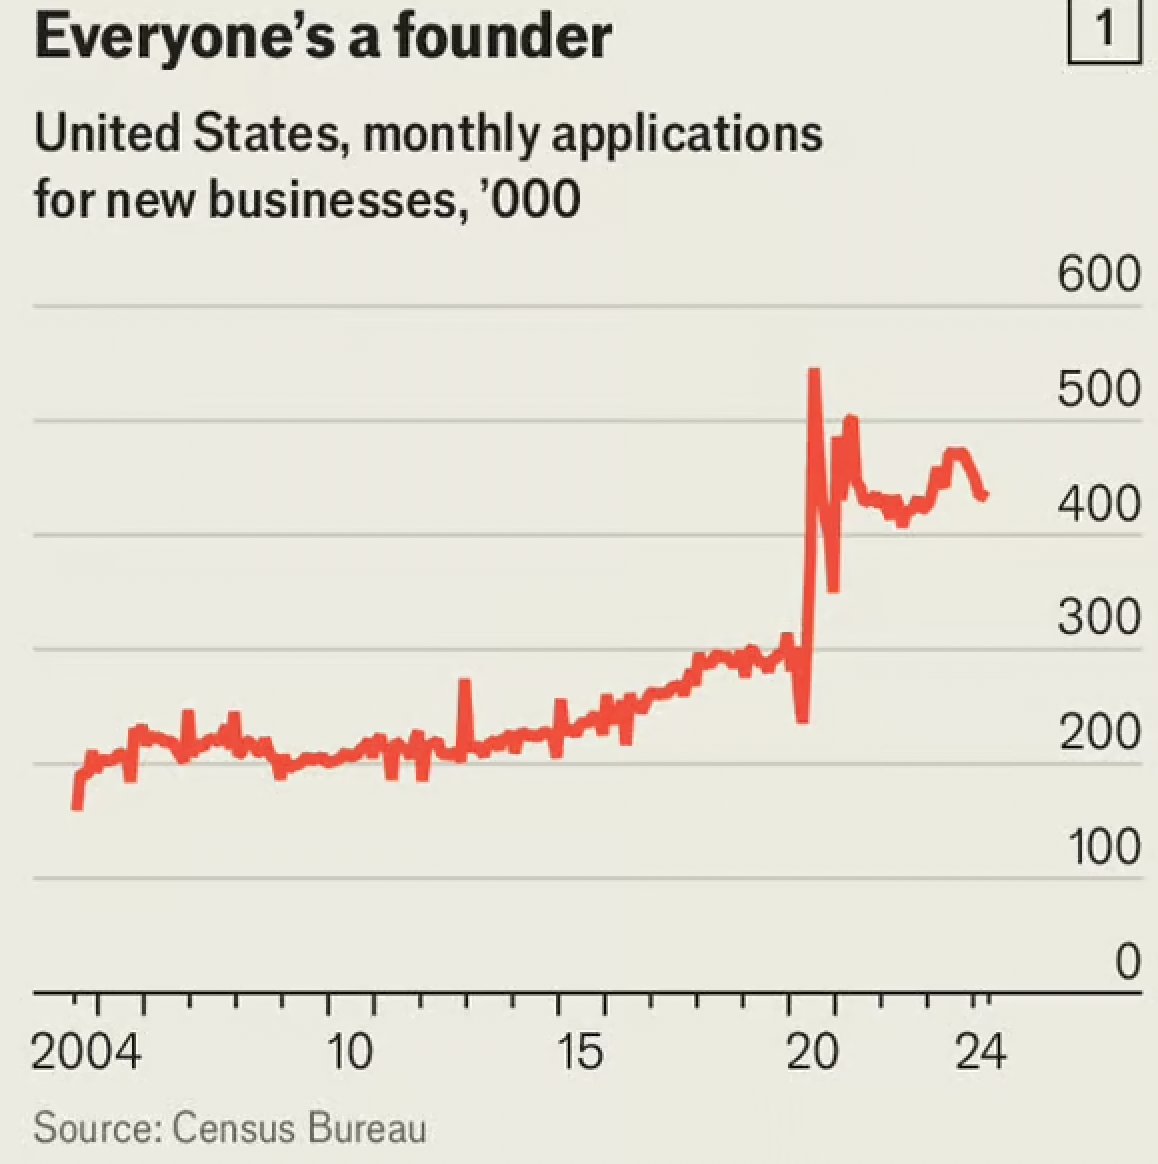 The US in the midst of a remarkable start-up boom. There are now about twice as many new business applications each month as there were in 2019